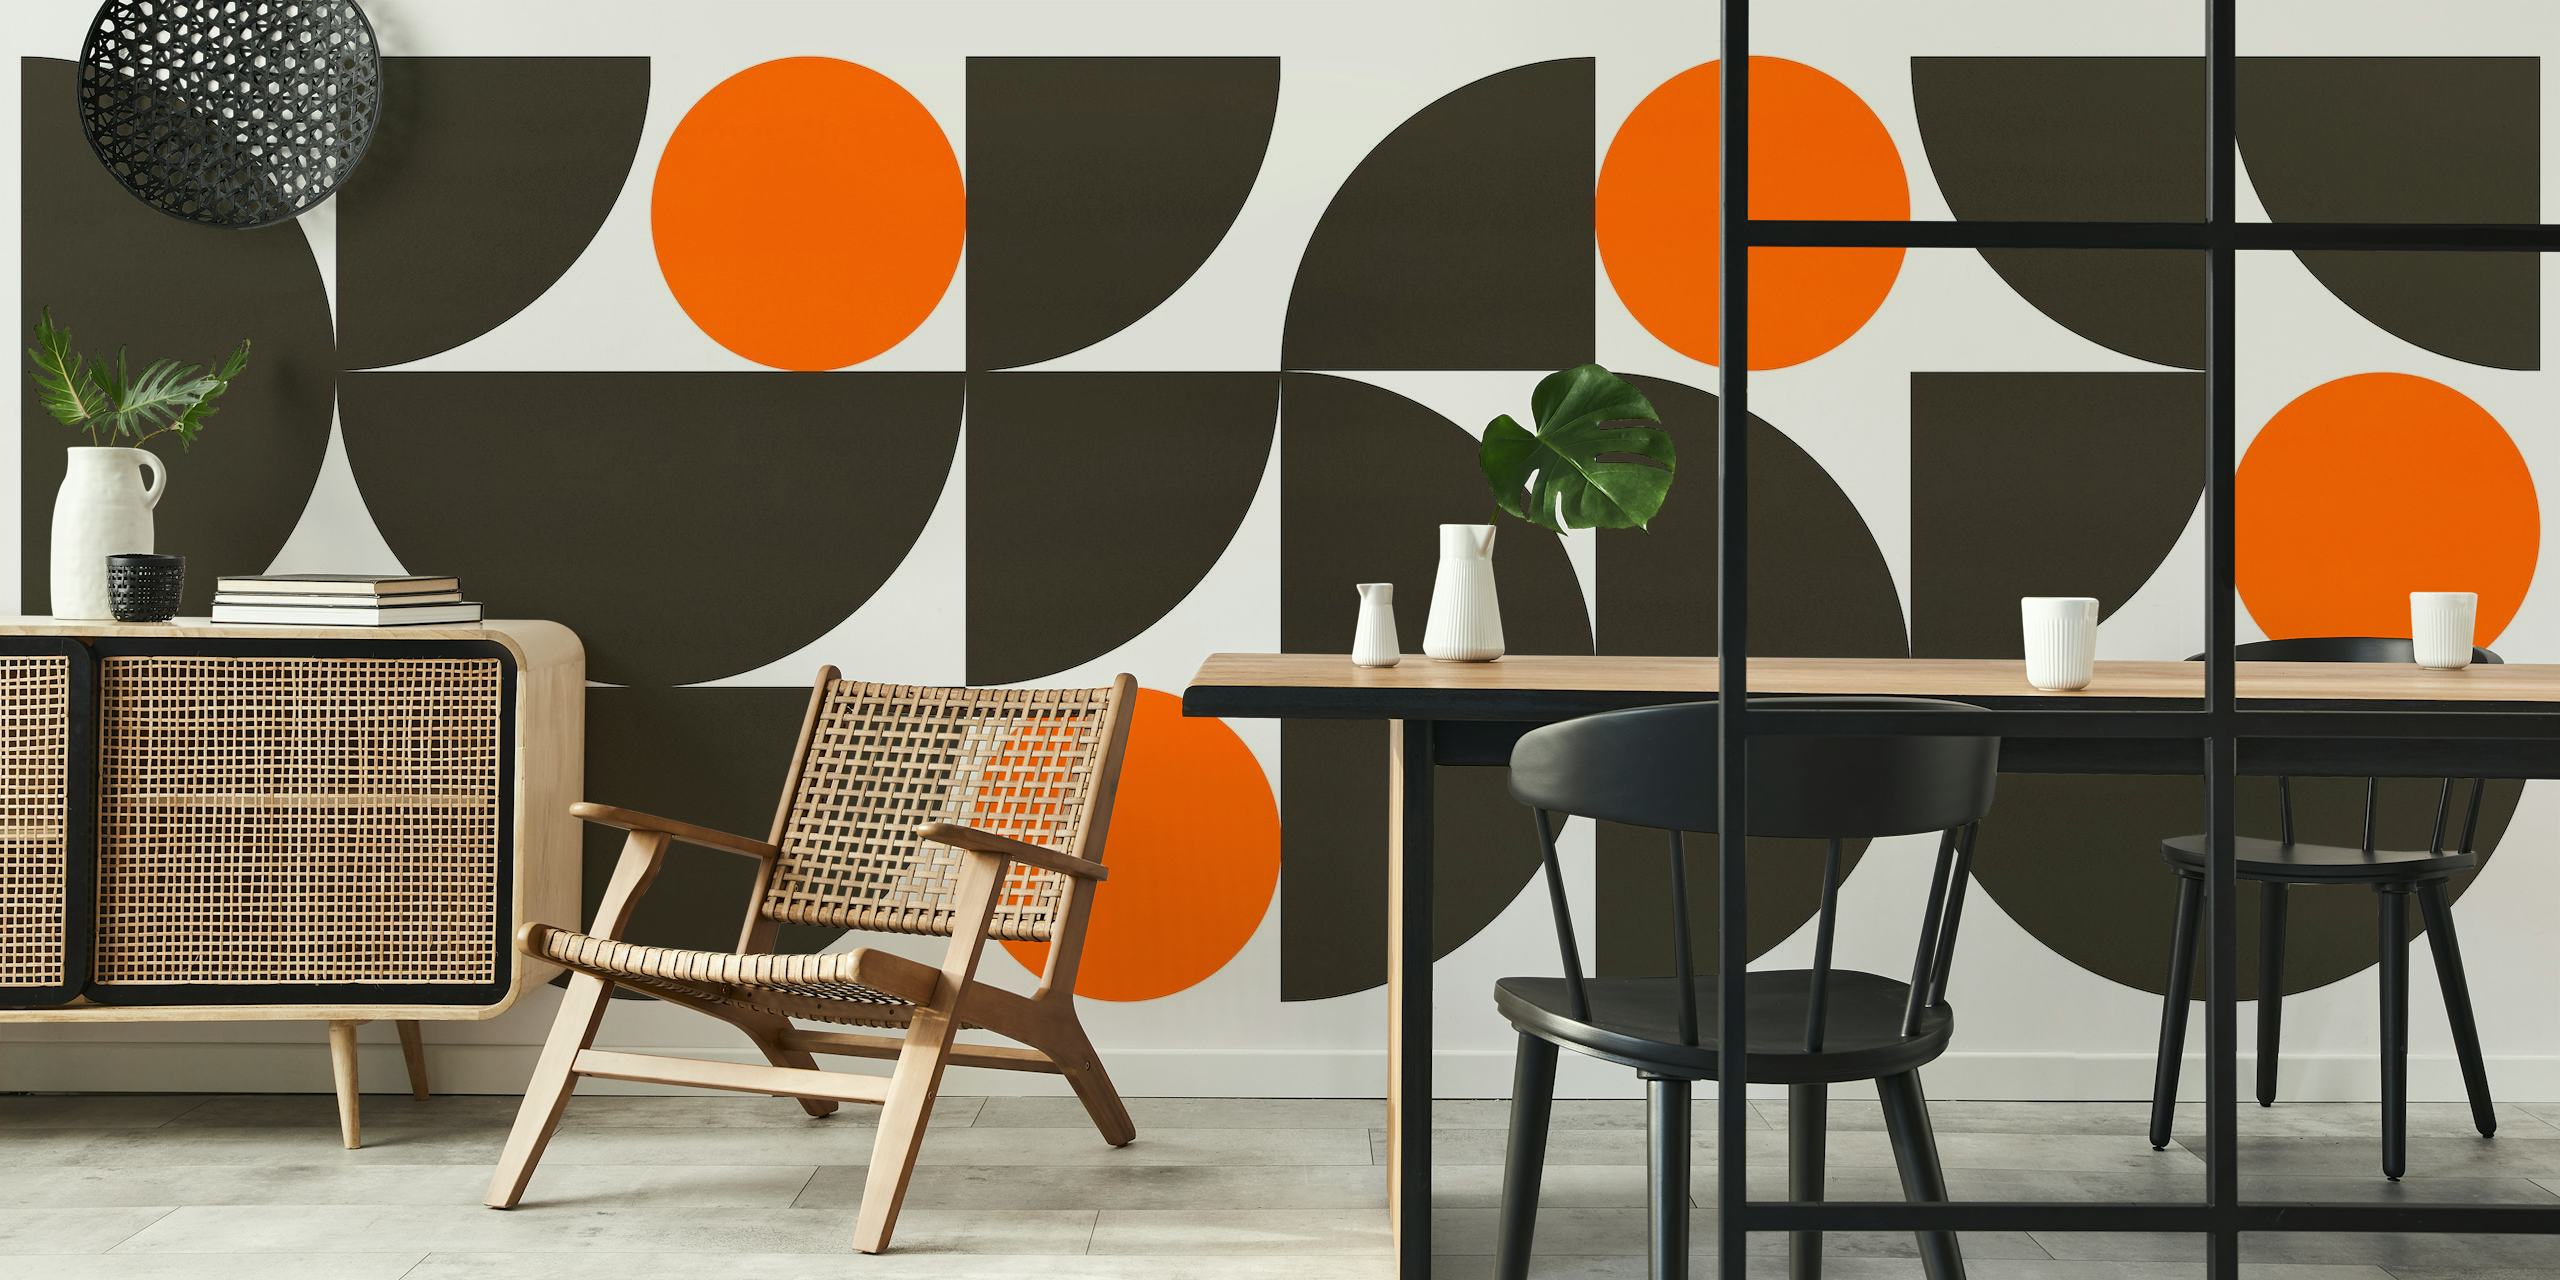 Abstract geometric wall mural with circles in black, white, and orange